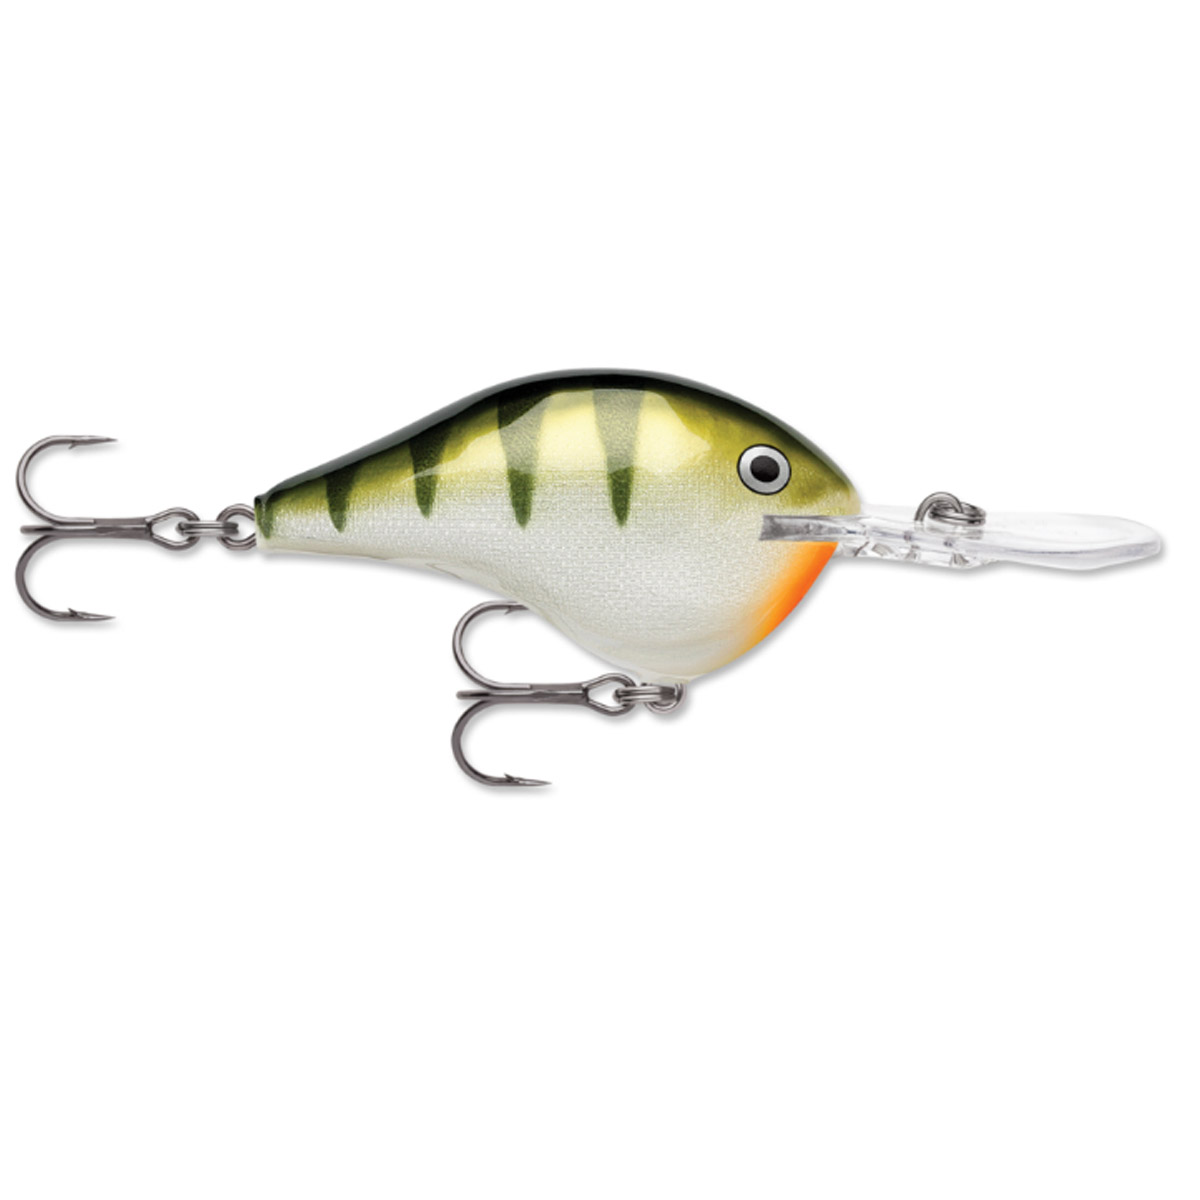 Rapala Dives-To DT14